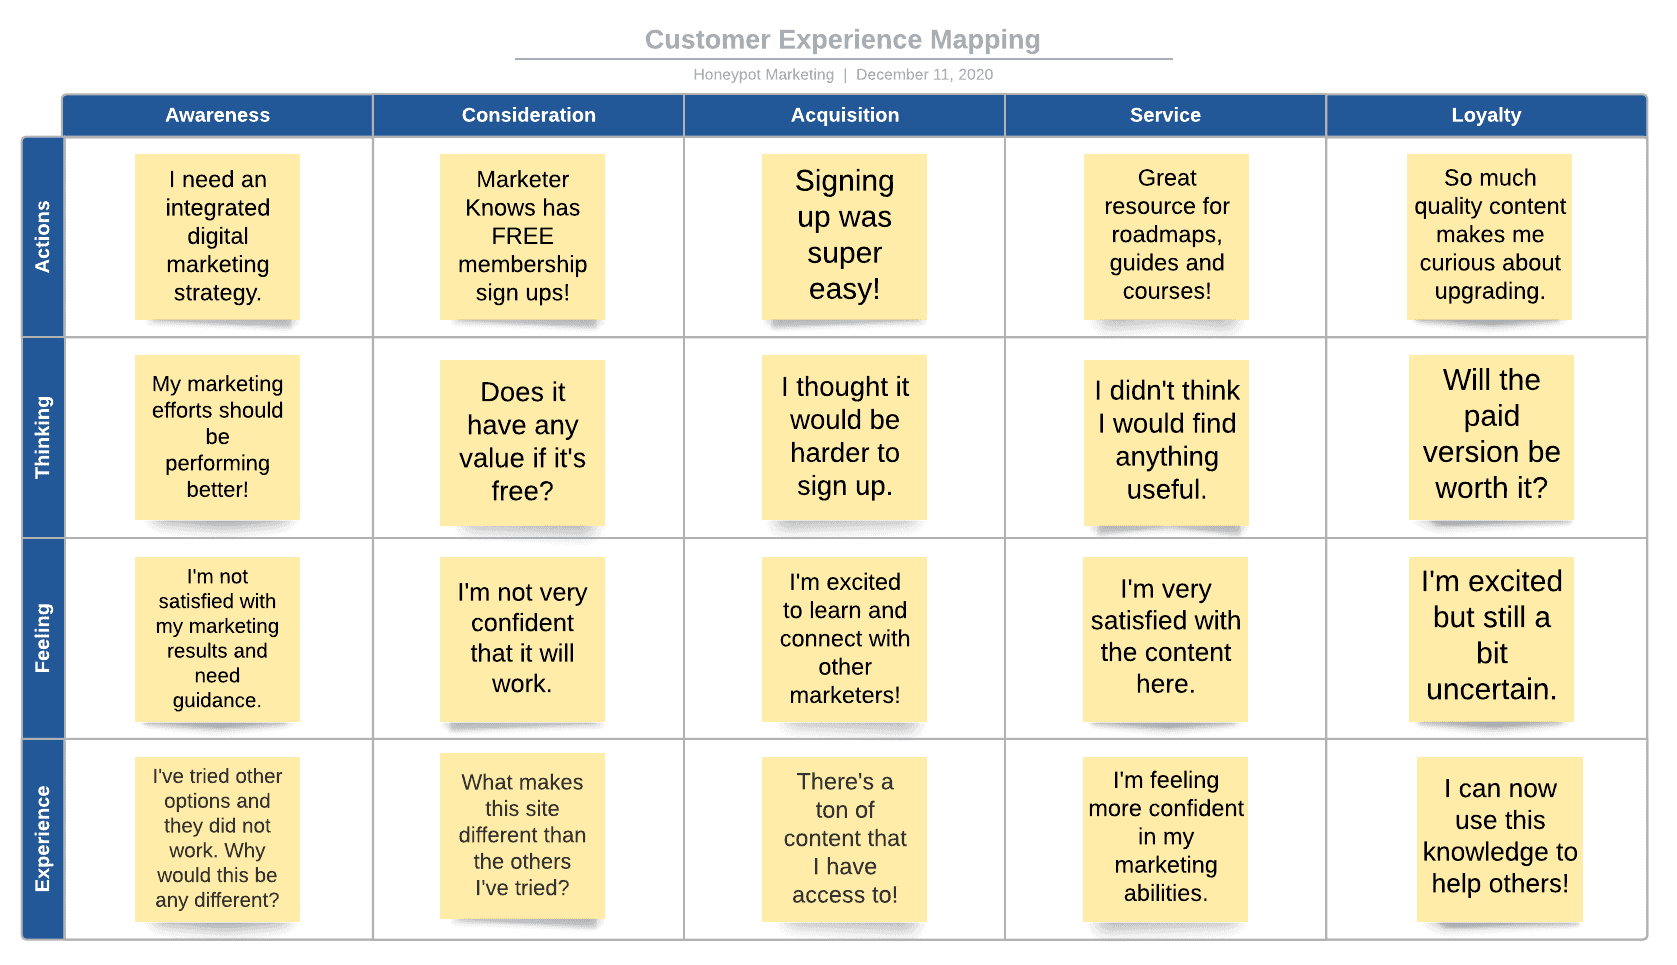 An example of a customer experience map showing their experience during the stages of their journey